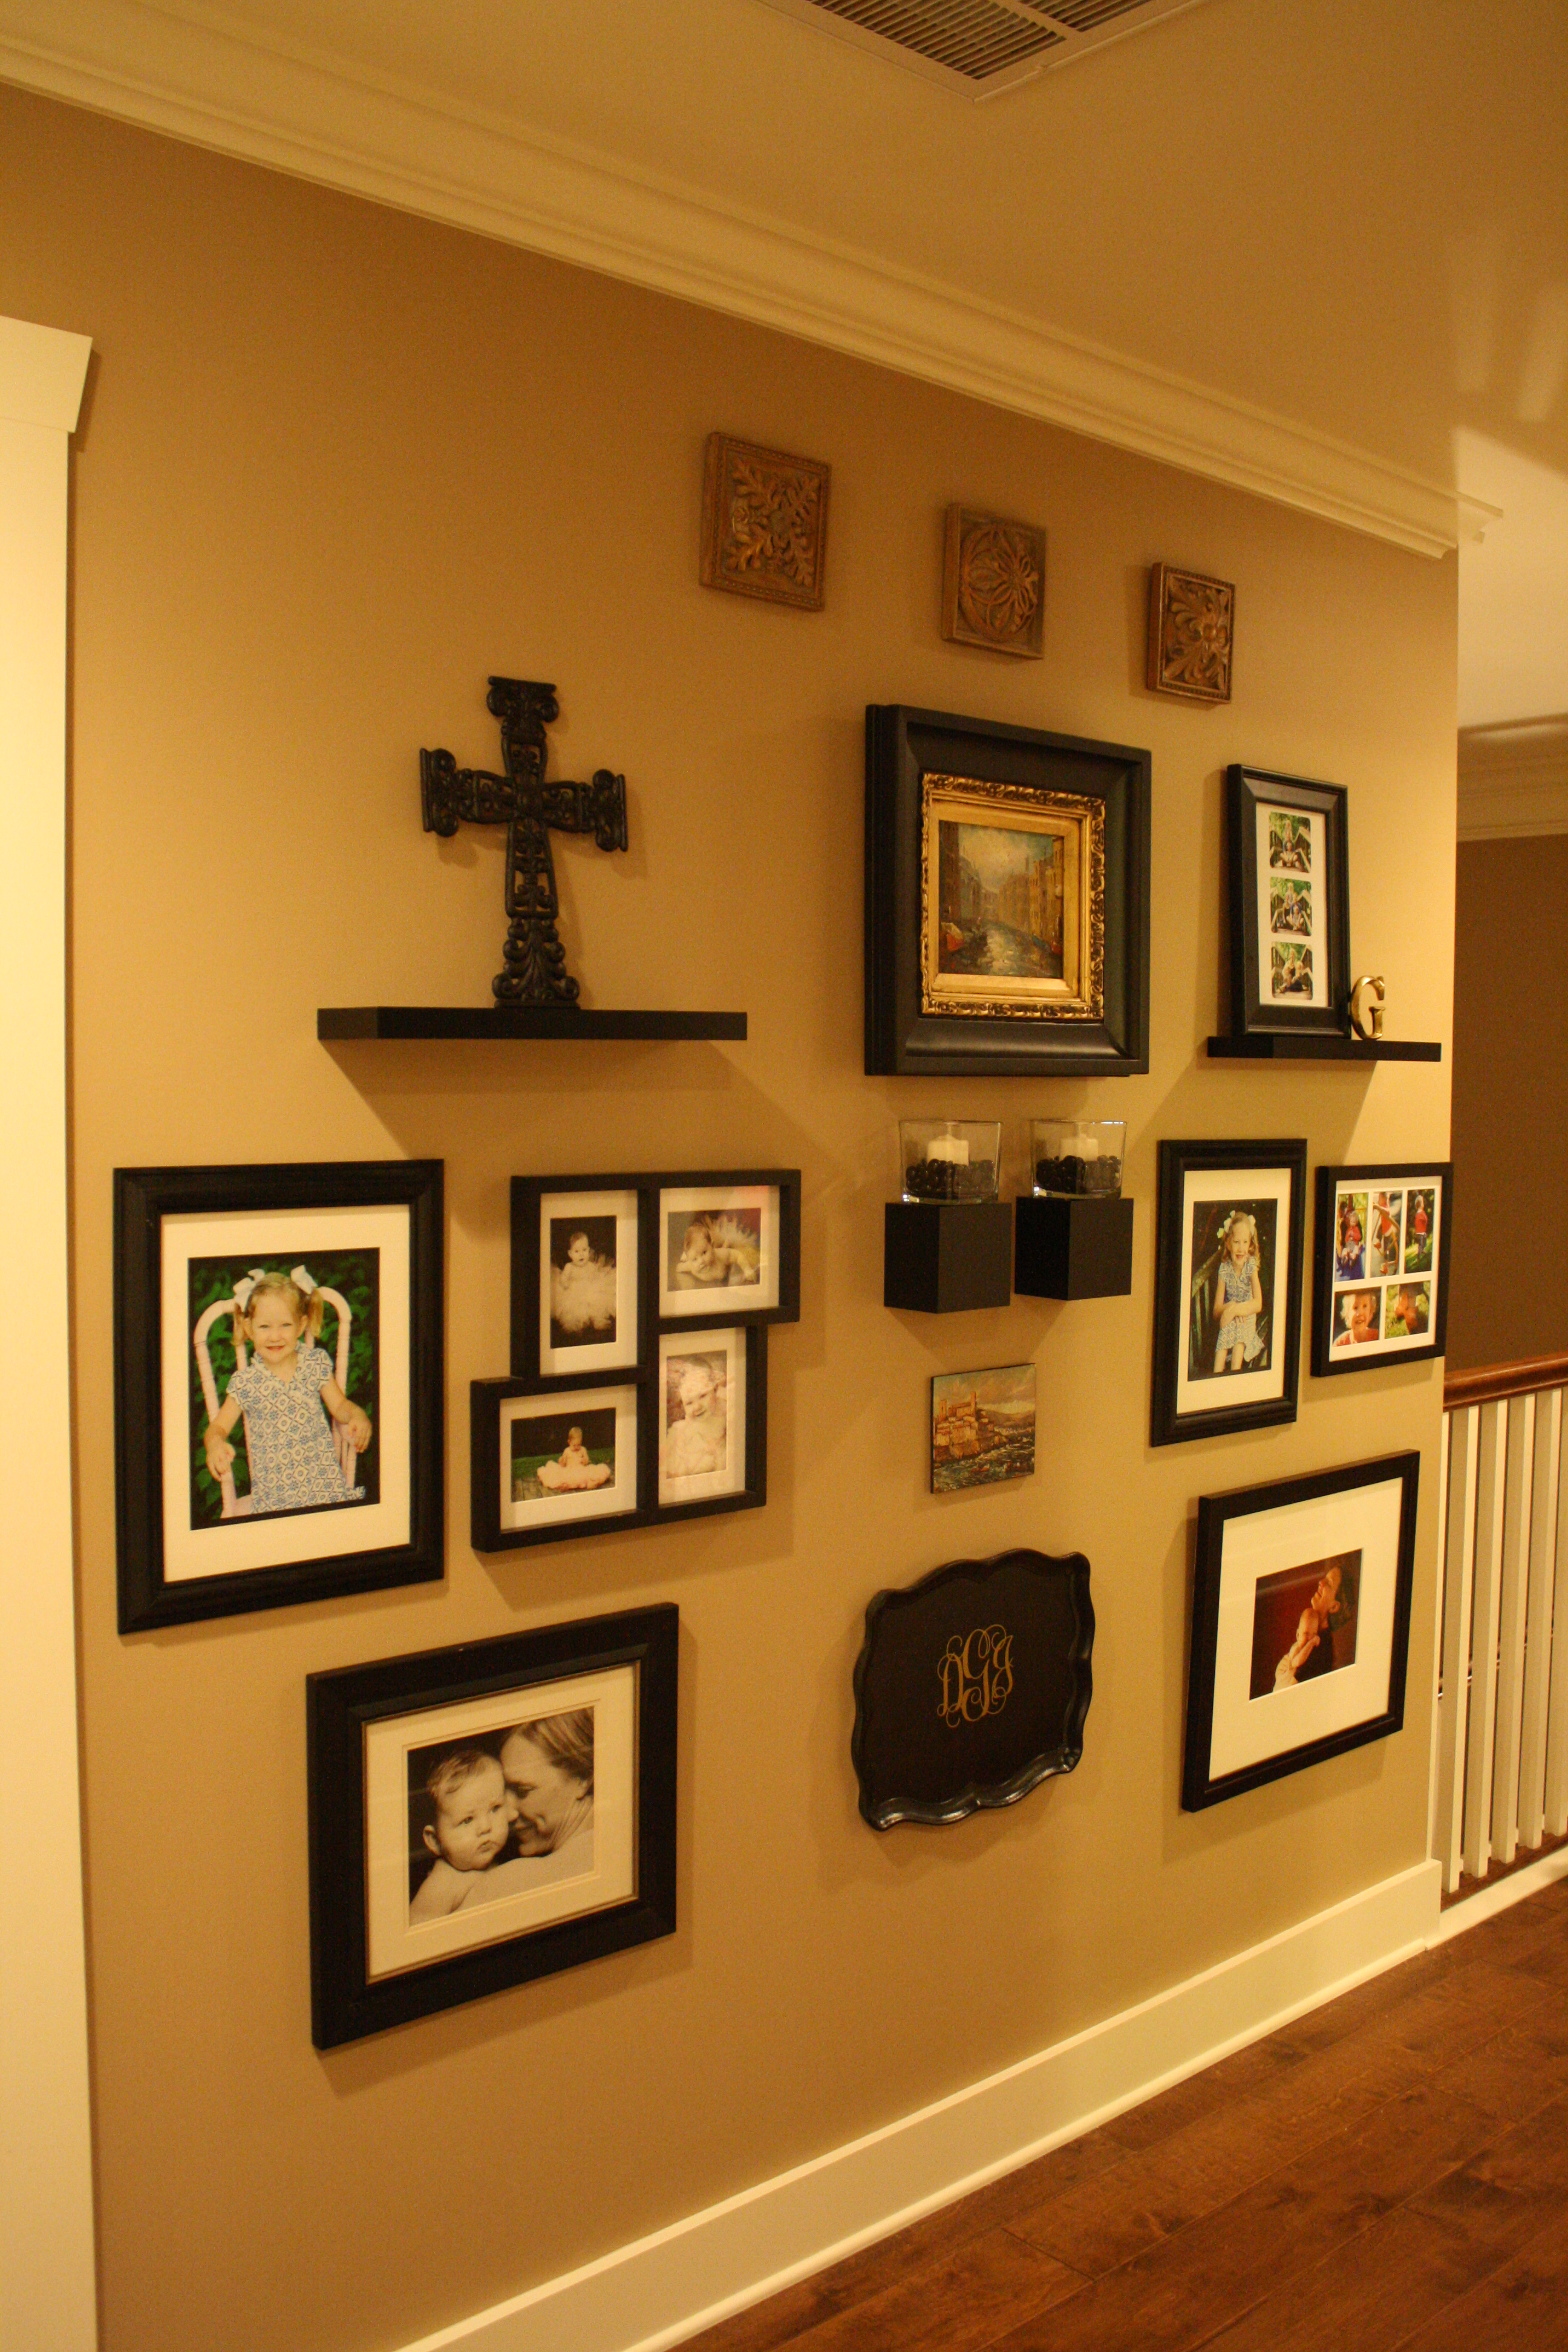 Photo Gallery Wall Examples Best Home Design Ideas